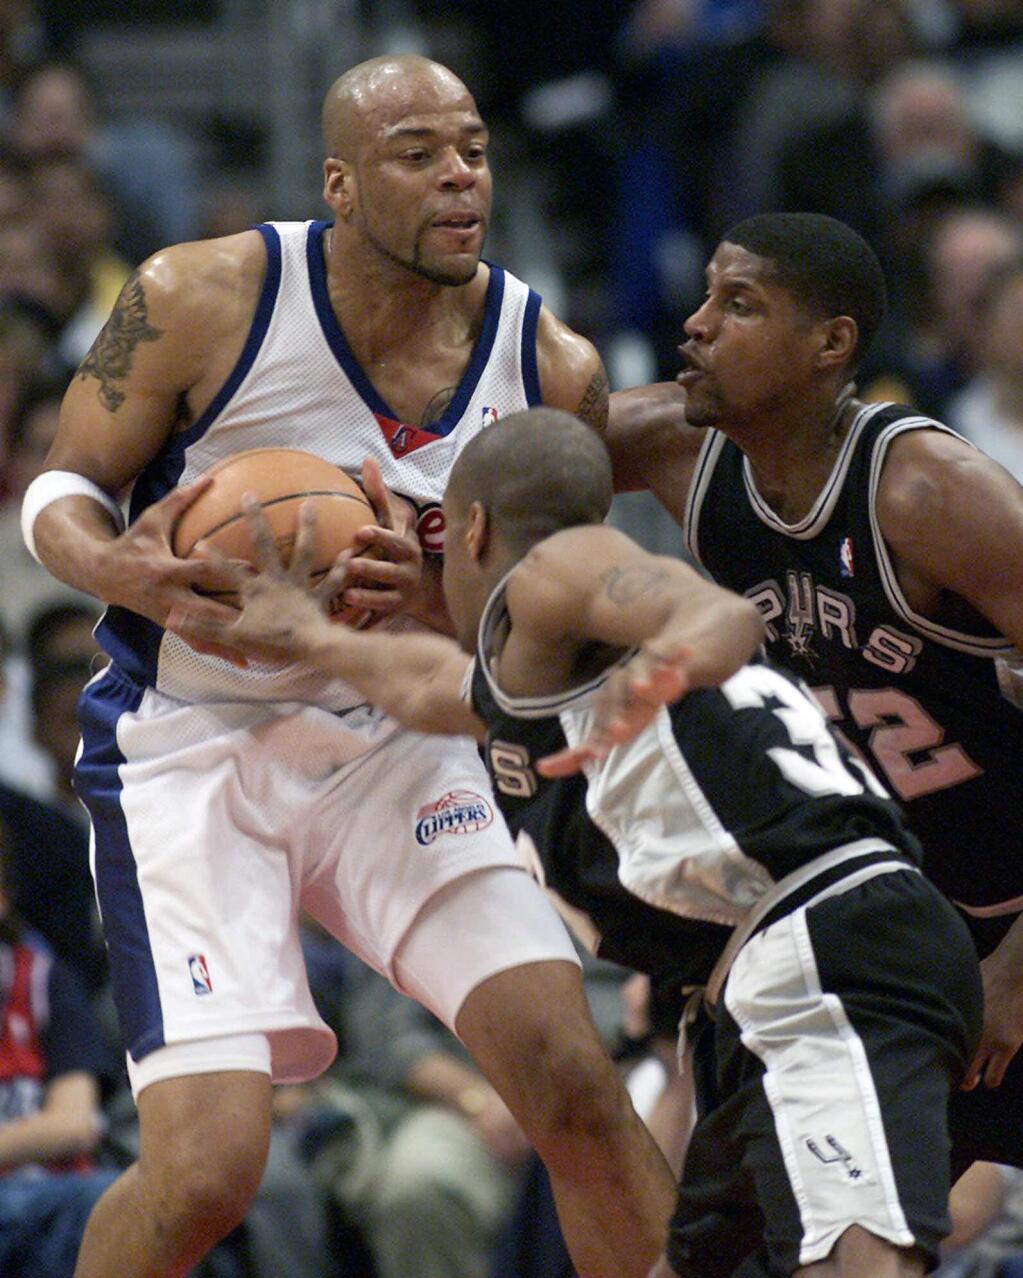 FILE - In this Saturday, April 7, 2001 file photo, Los Angeles Clippers' Sean Rooks fends off San Antonio Spurs defenders Antonio Daniels and Samaki Walker, right, during the first half of a basketball game in Los Angeles. Former NBA center and Philadelphia 76ers assistant coach Sean Rooks has died. He was 46. The team released a statement from Deborah Brown, the mother of Rooks, on Tuesday night, June 7, 2016. (AP Photo/Jill Connelly, File)